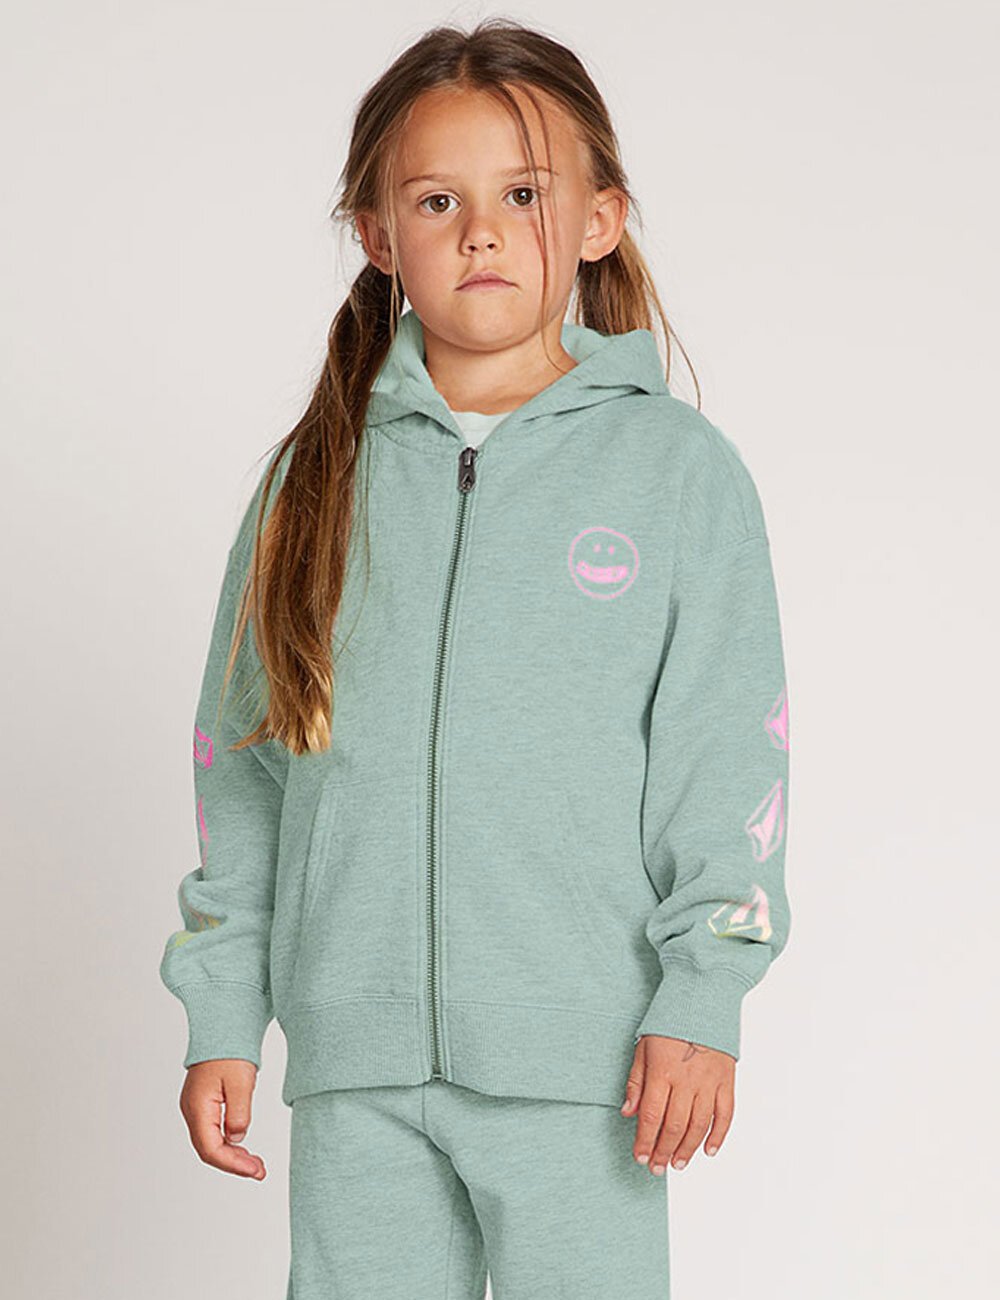 GIRLS ZIPPETY ZIP - Shop All Girls' Clothing - Hoodies, Tees & More for ...